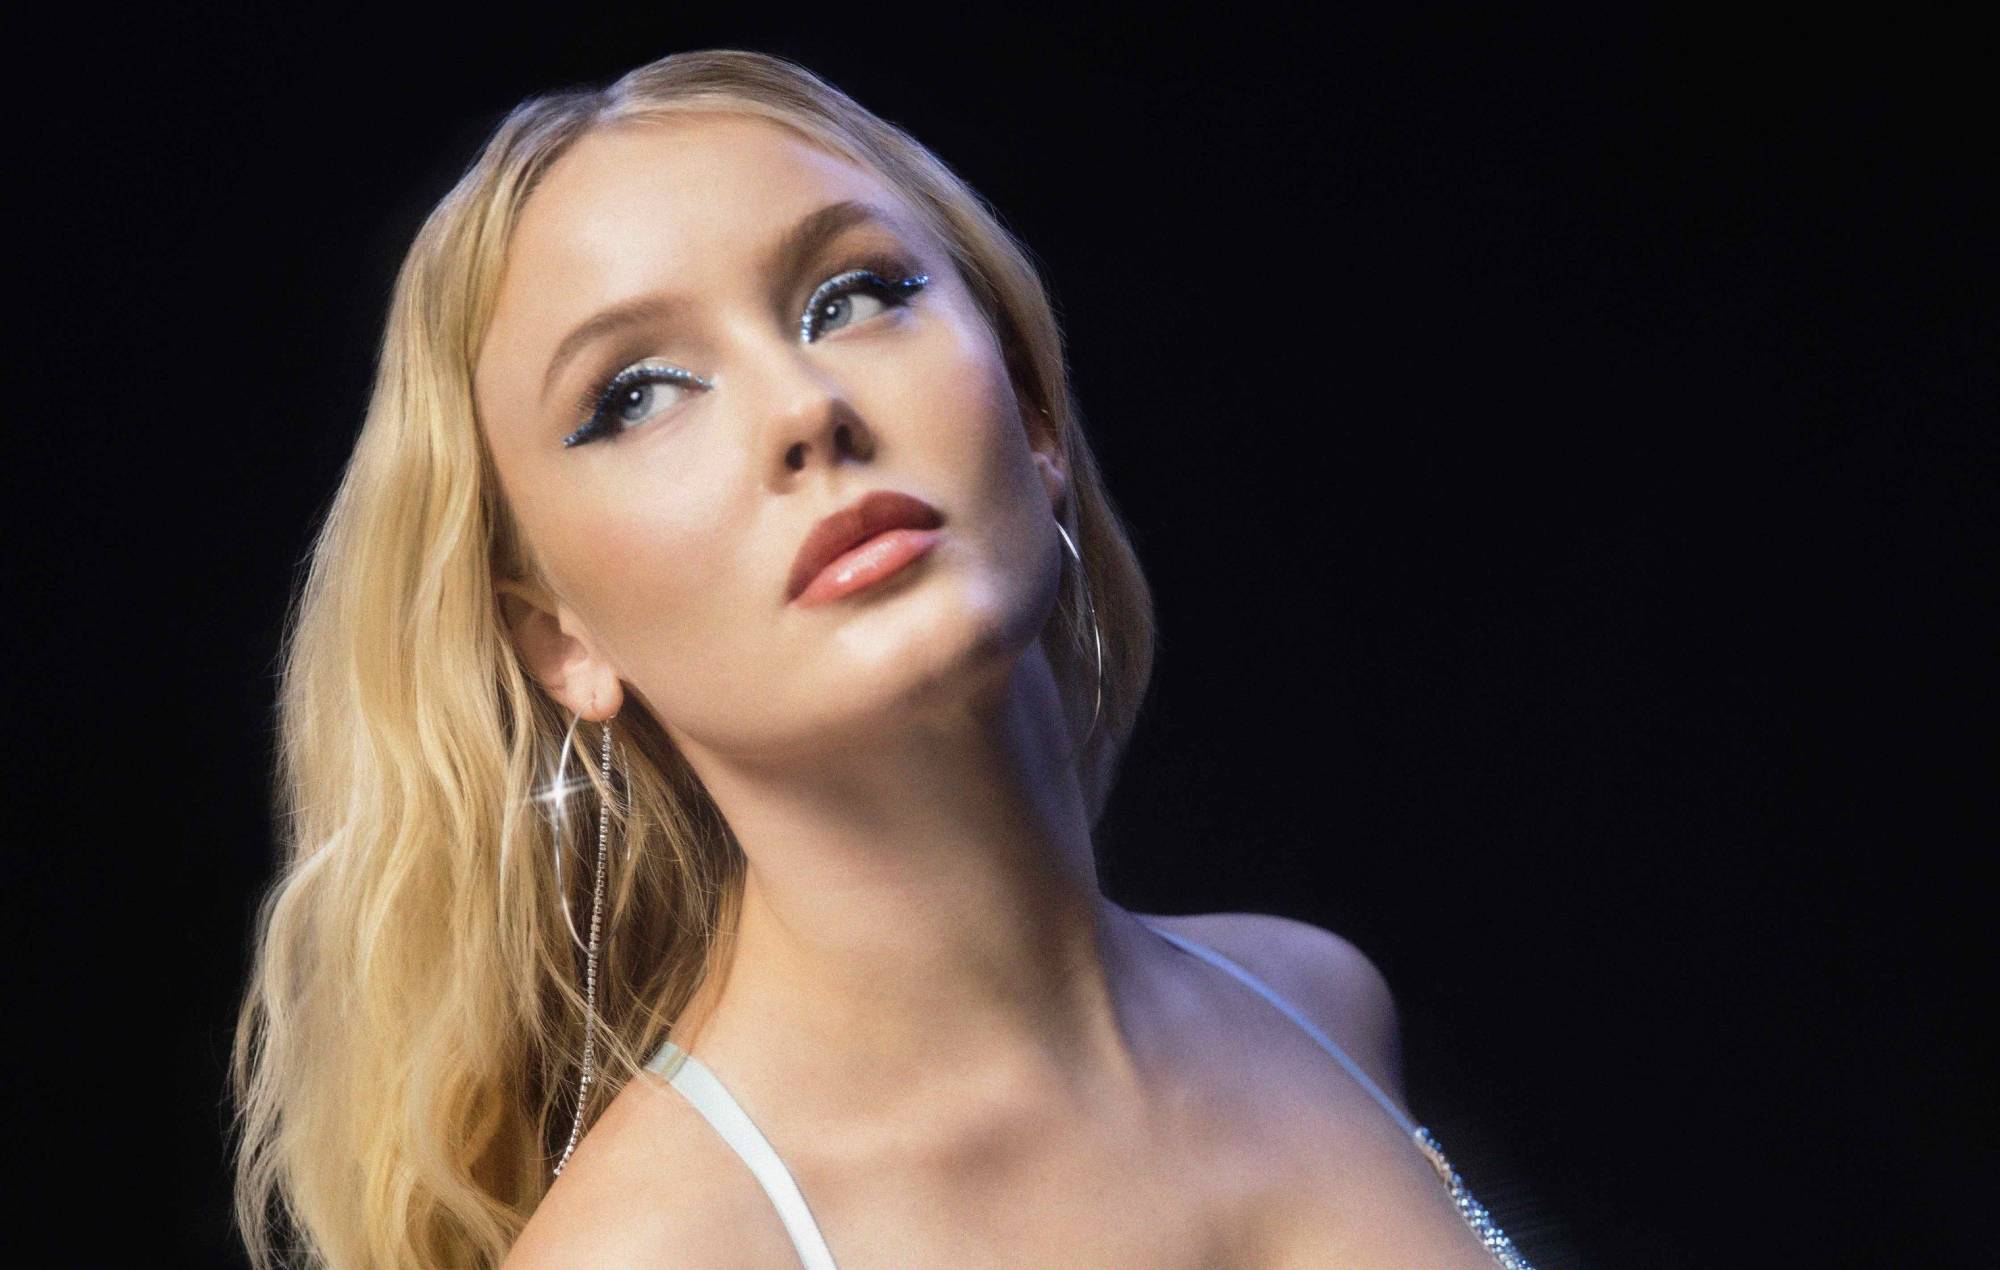 Zara Larsson gives an update on her new album: “It’s pretty much done”